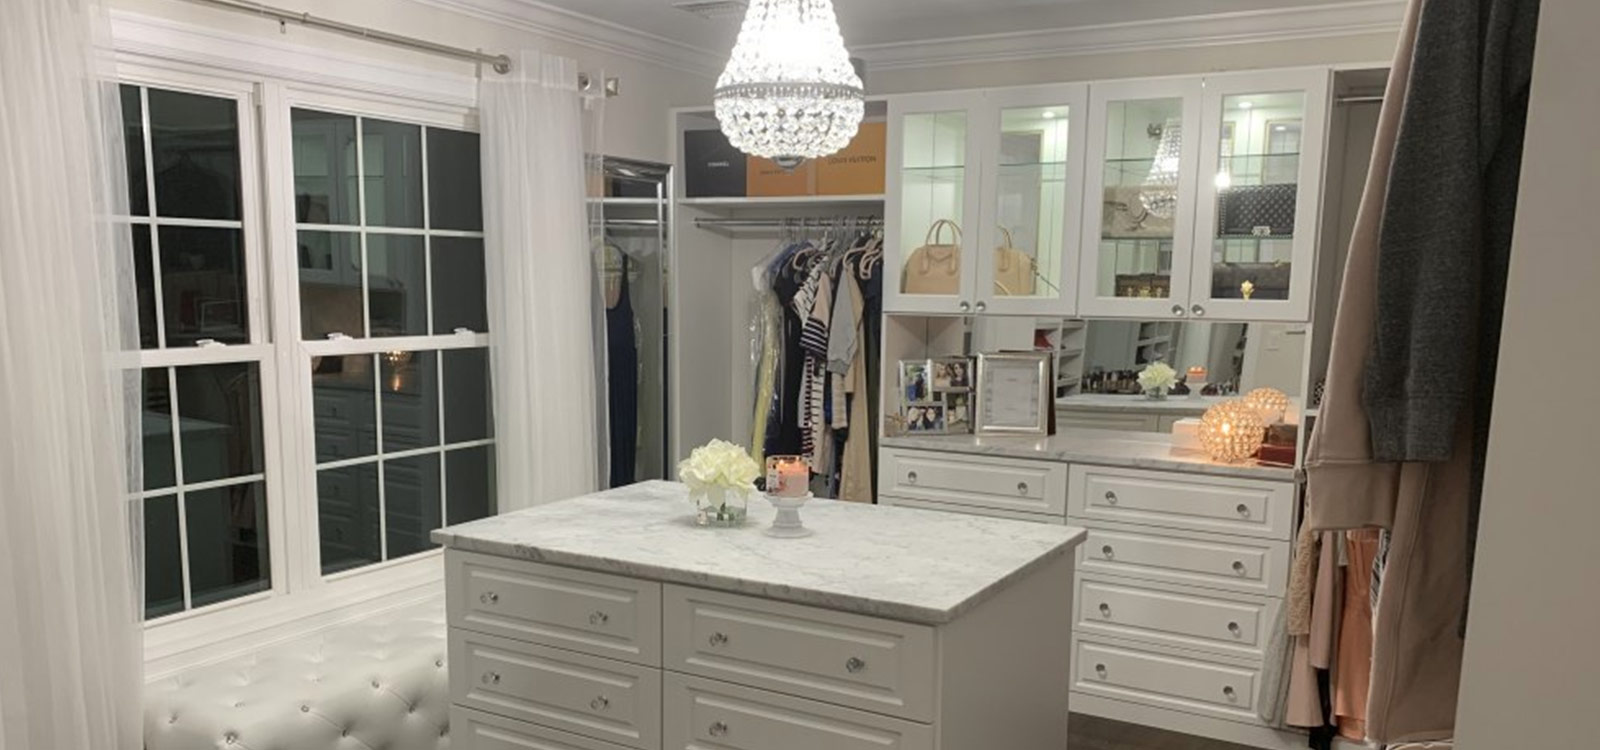 We offer Custom Closets and Home Storage Solutions